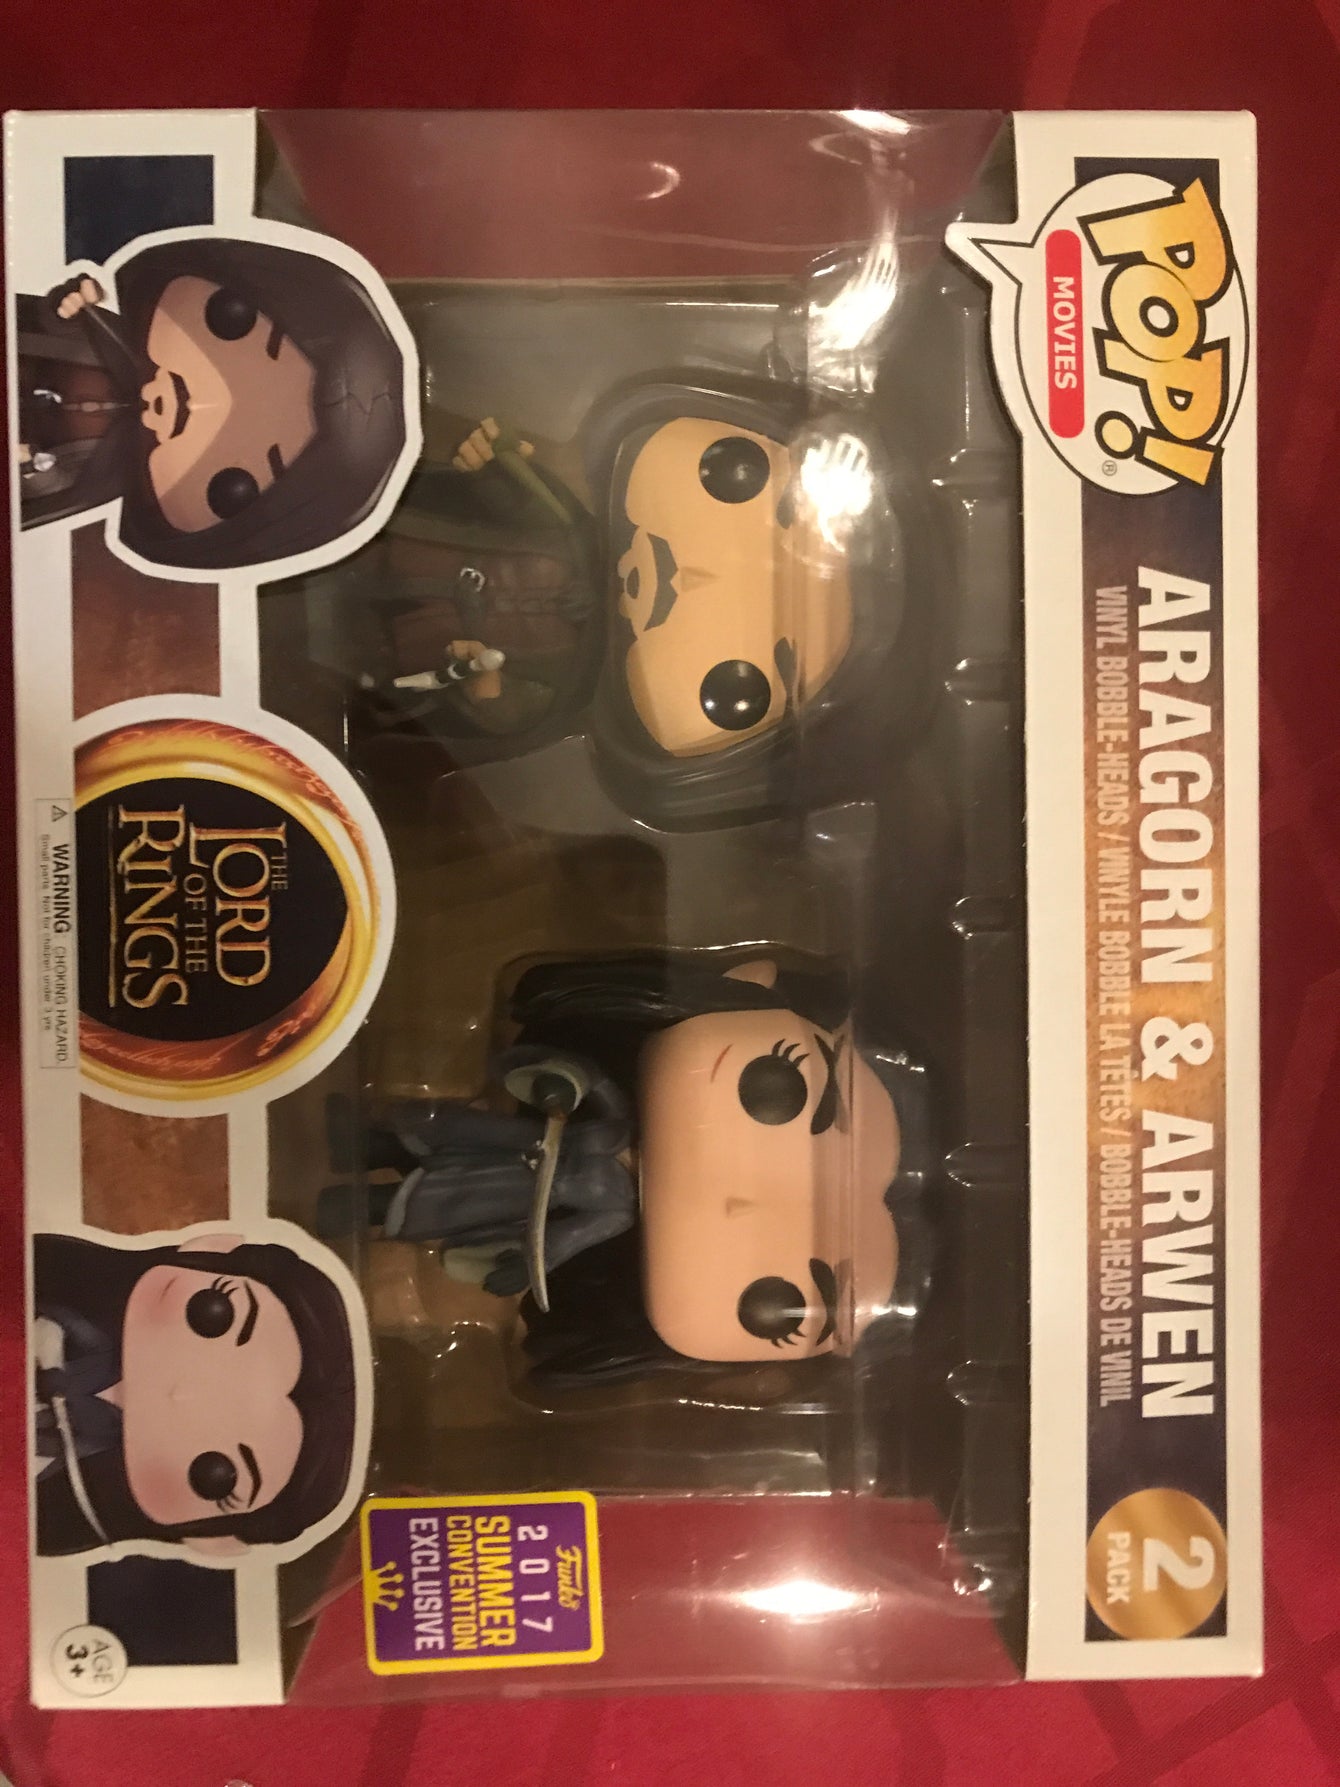 Aragorn and Arwen 2 pack B2